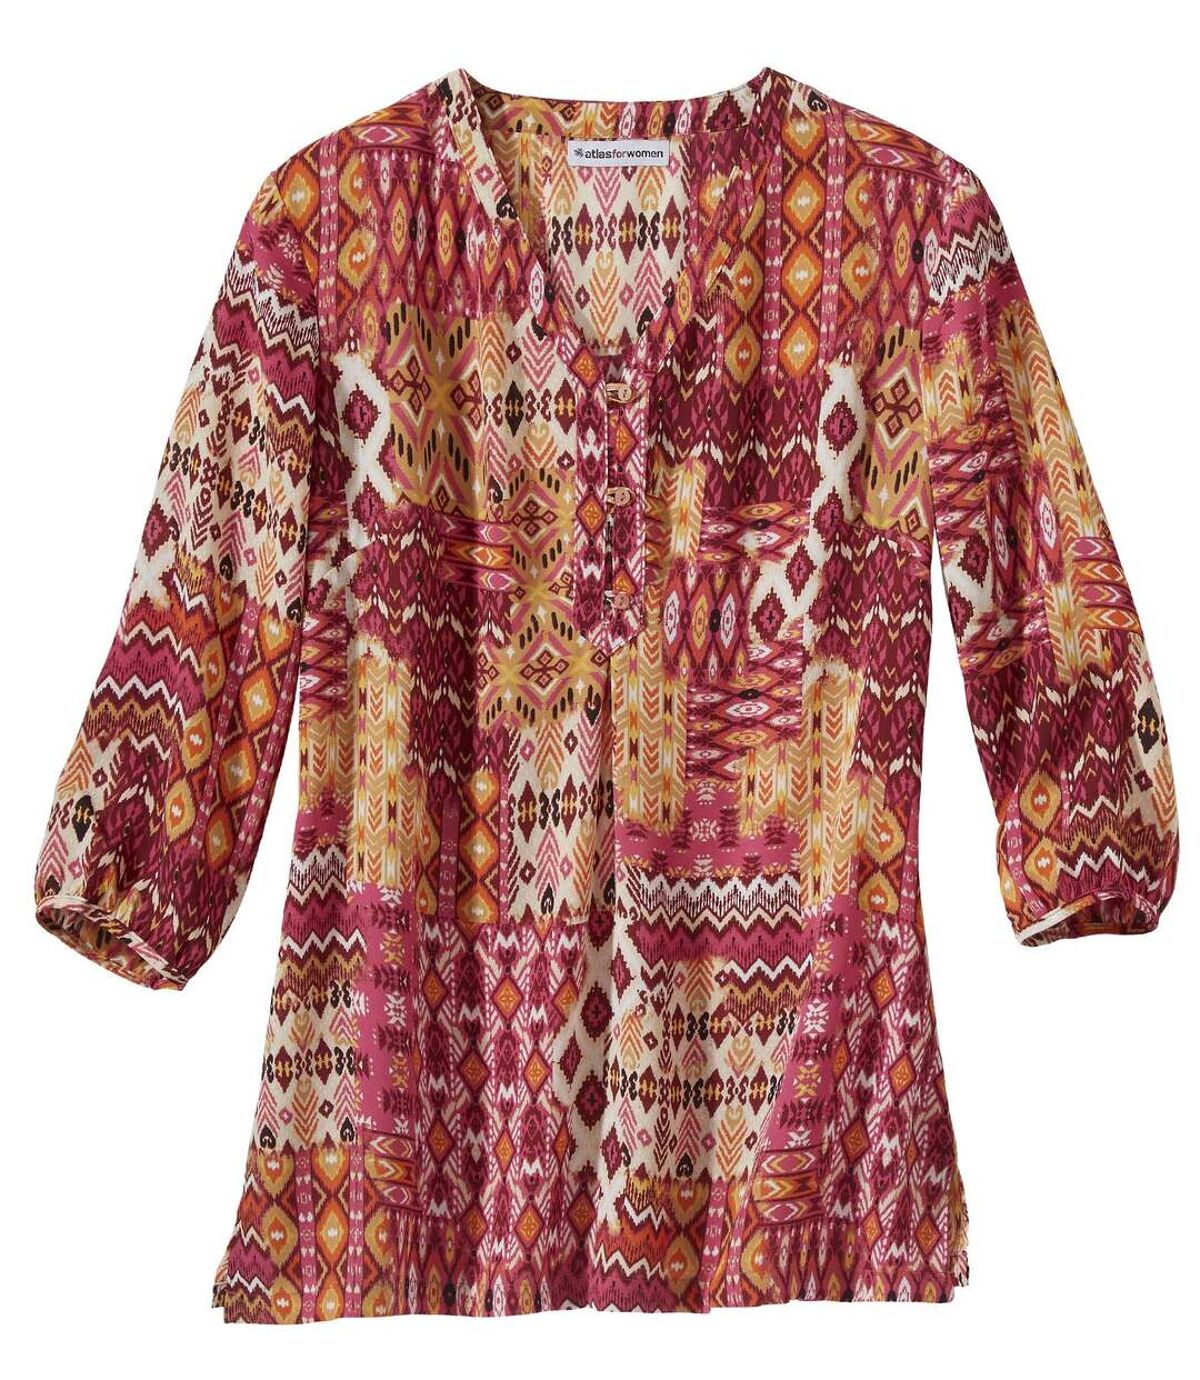 Women's Patchwork Impression Top with Three-Quarter Sleeves | Atlas For Men